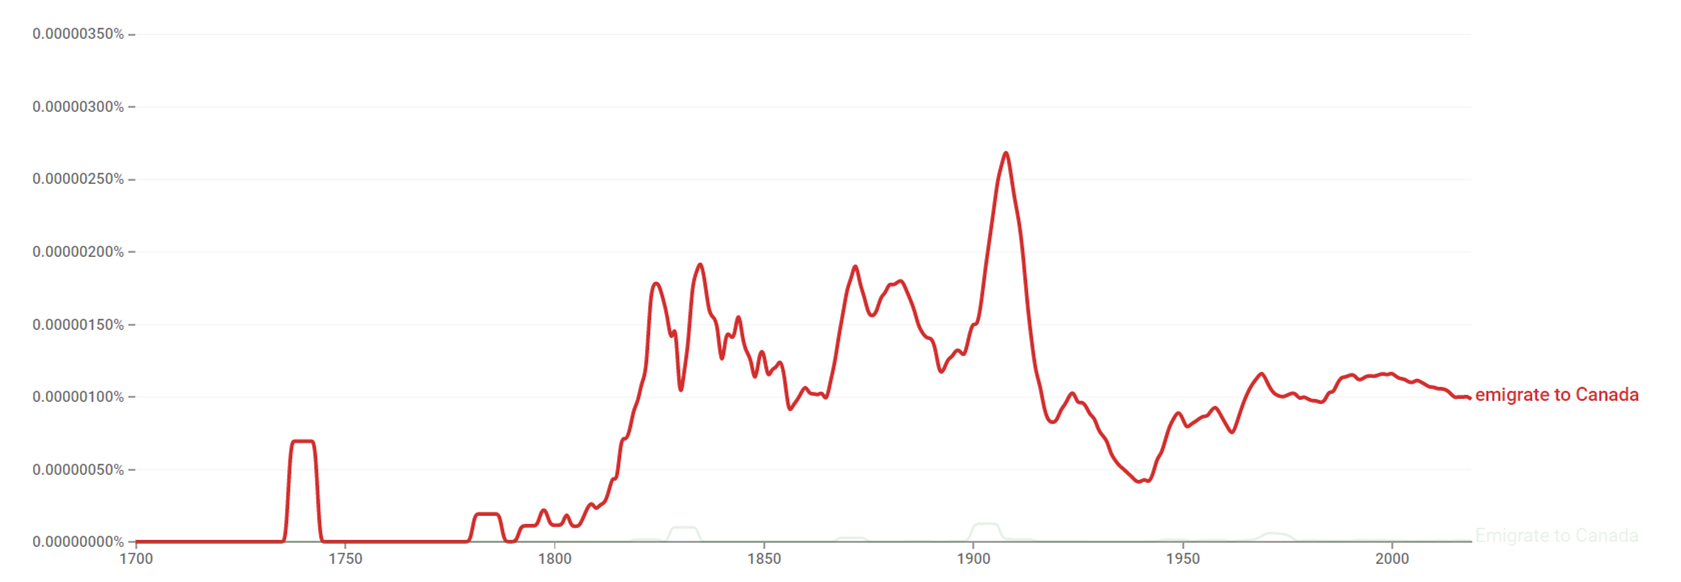 Emigrate to Canada ngram.png